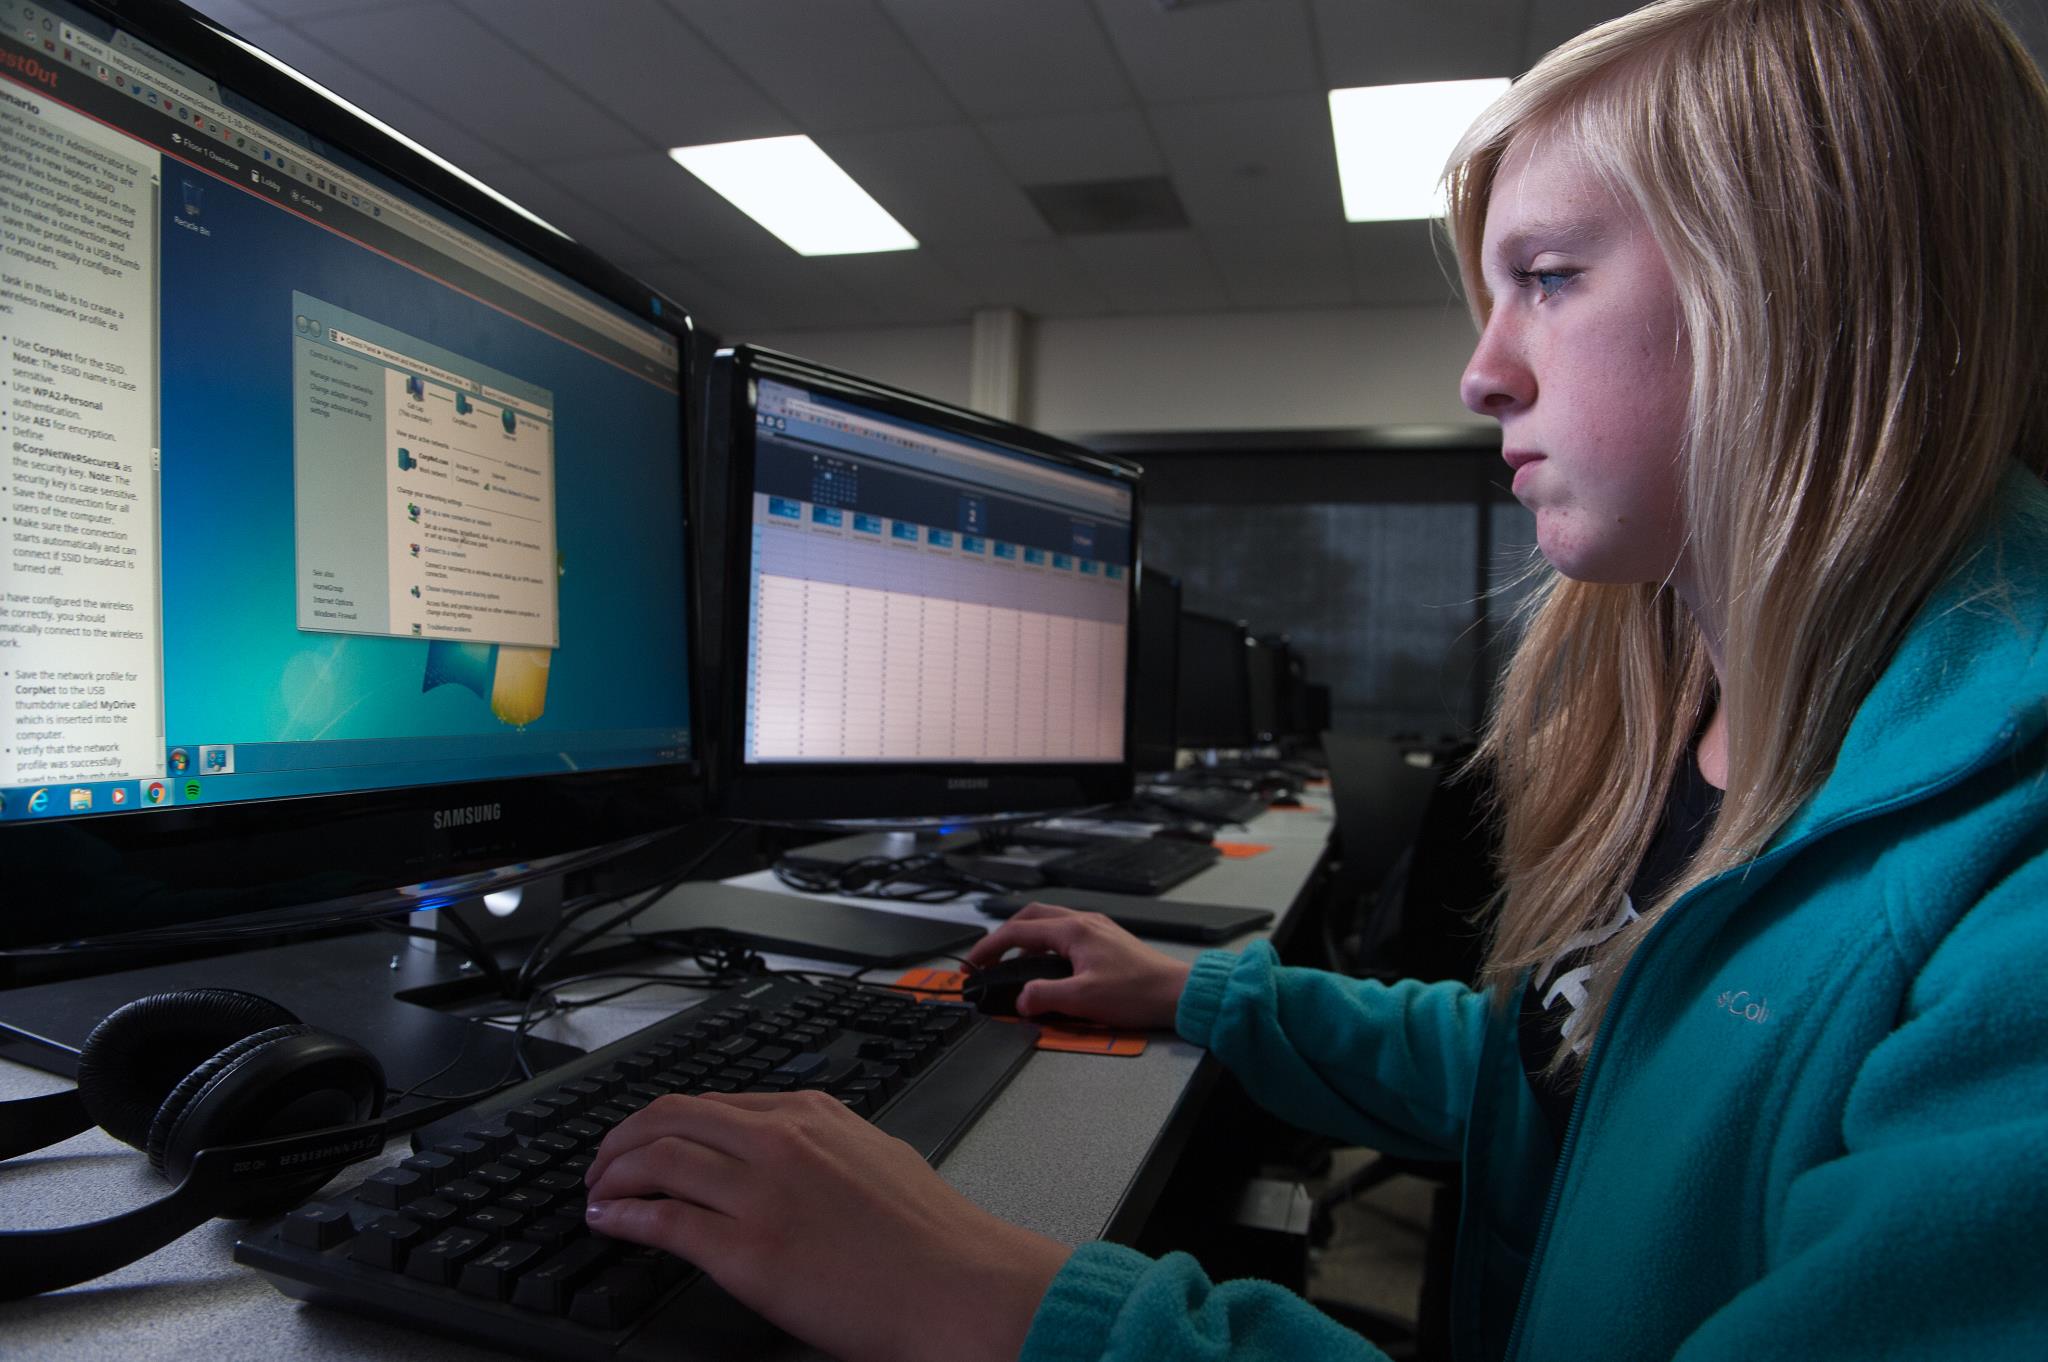 Female Cybersecurity student works on her computer in the classroom